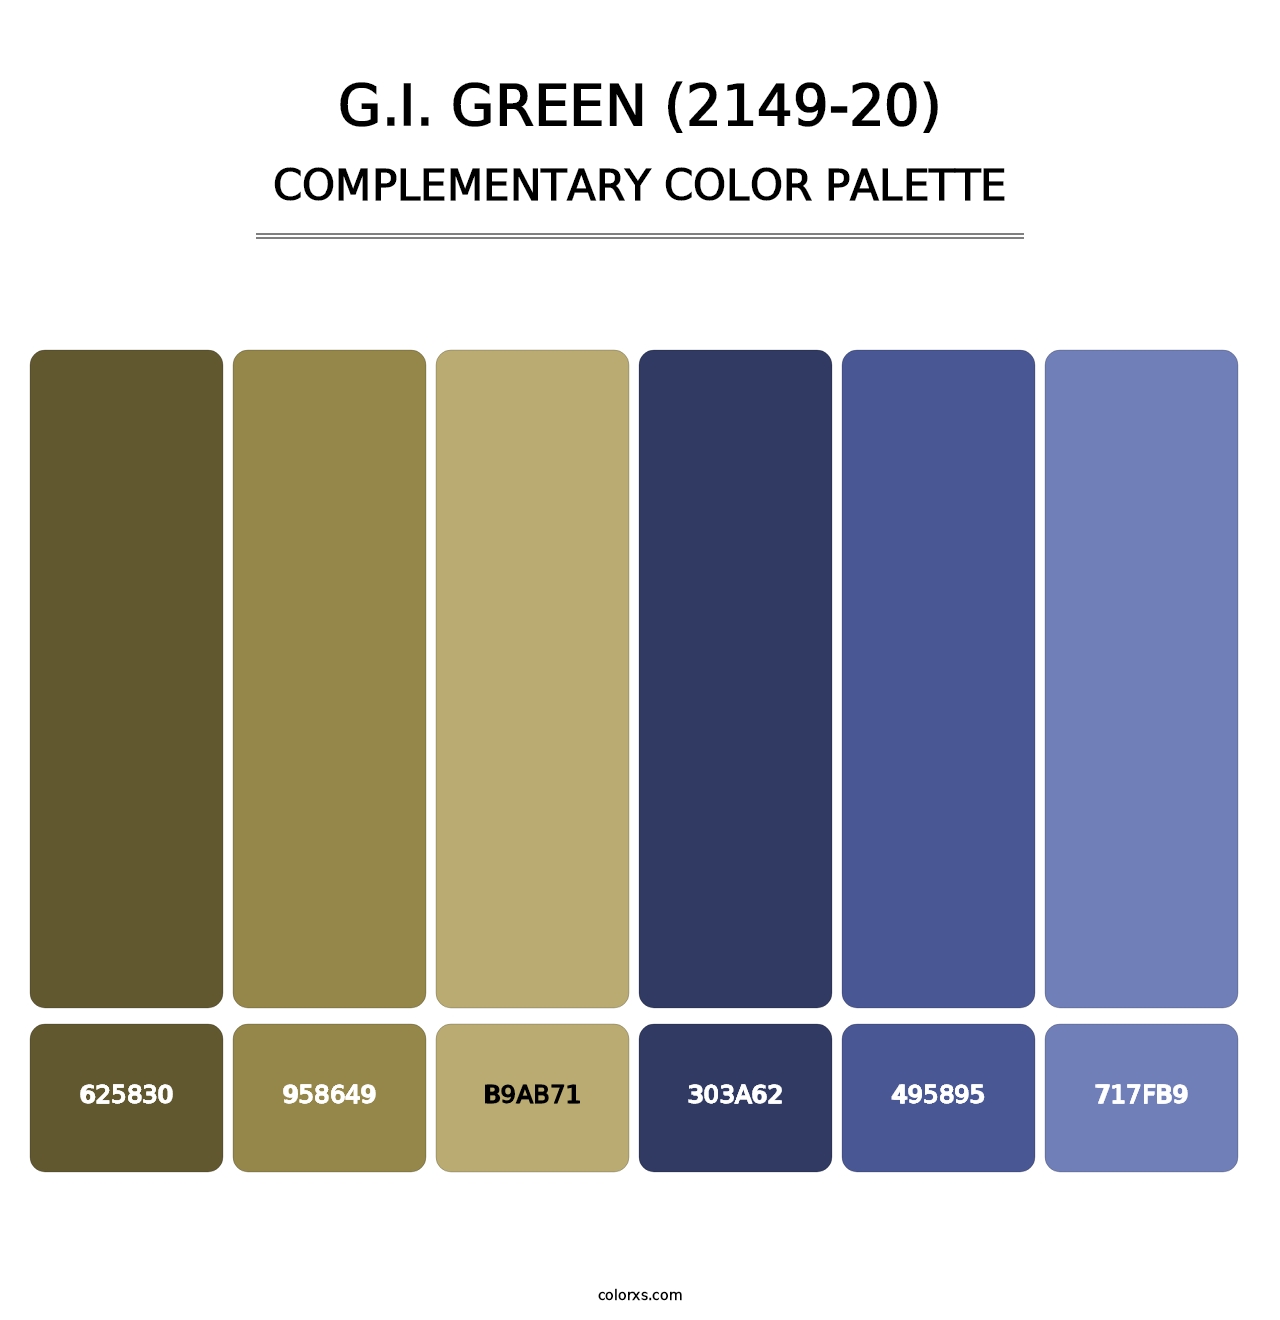 G.I. Green (2149-20) - Complementary Color Palette